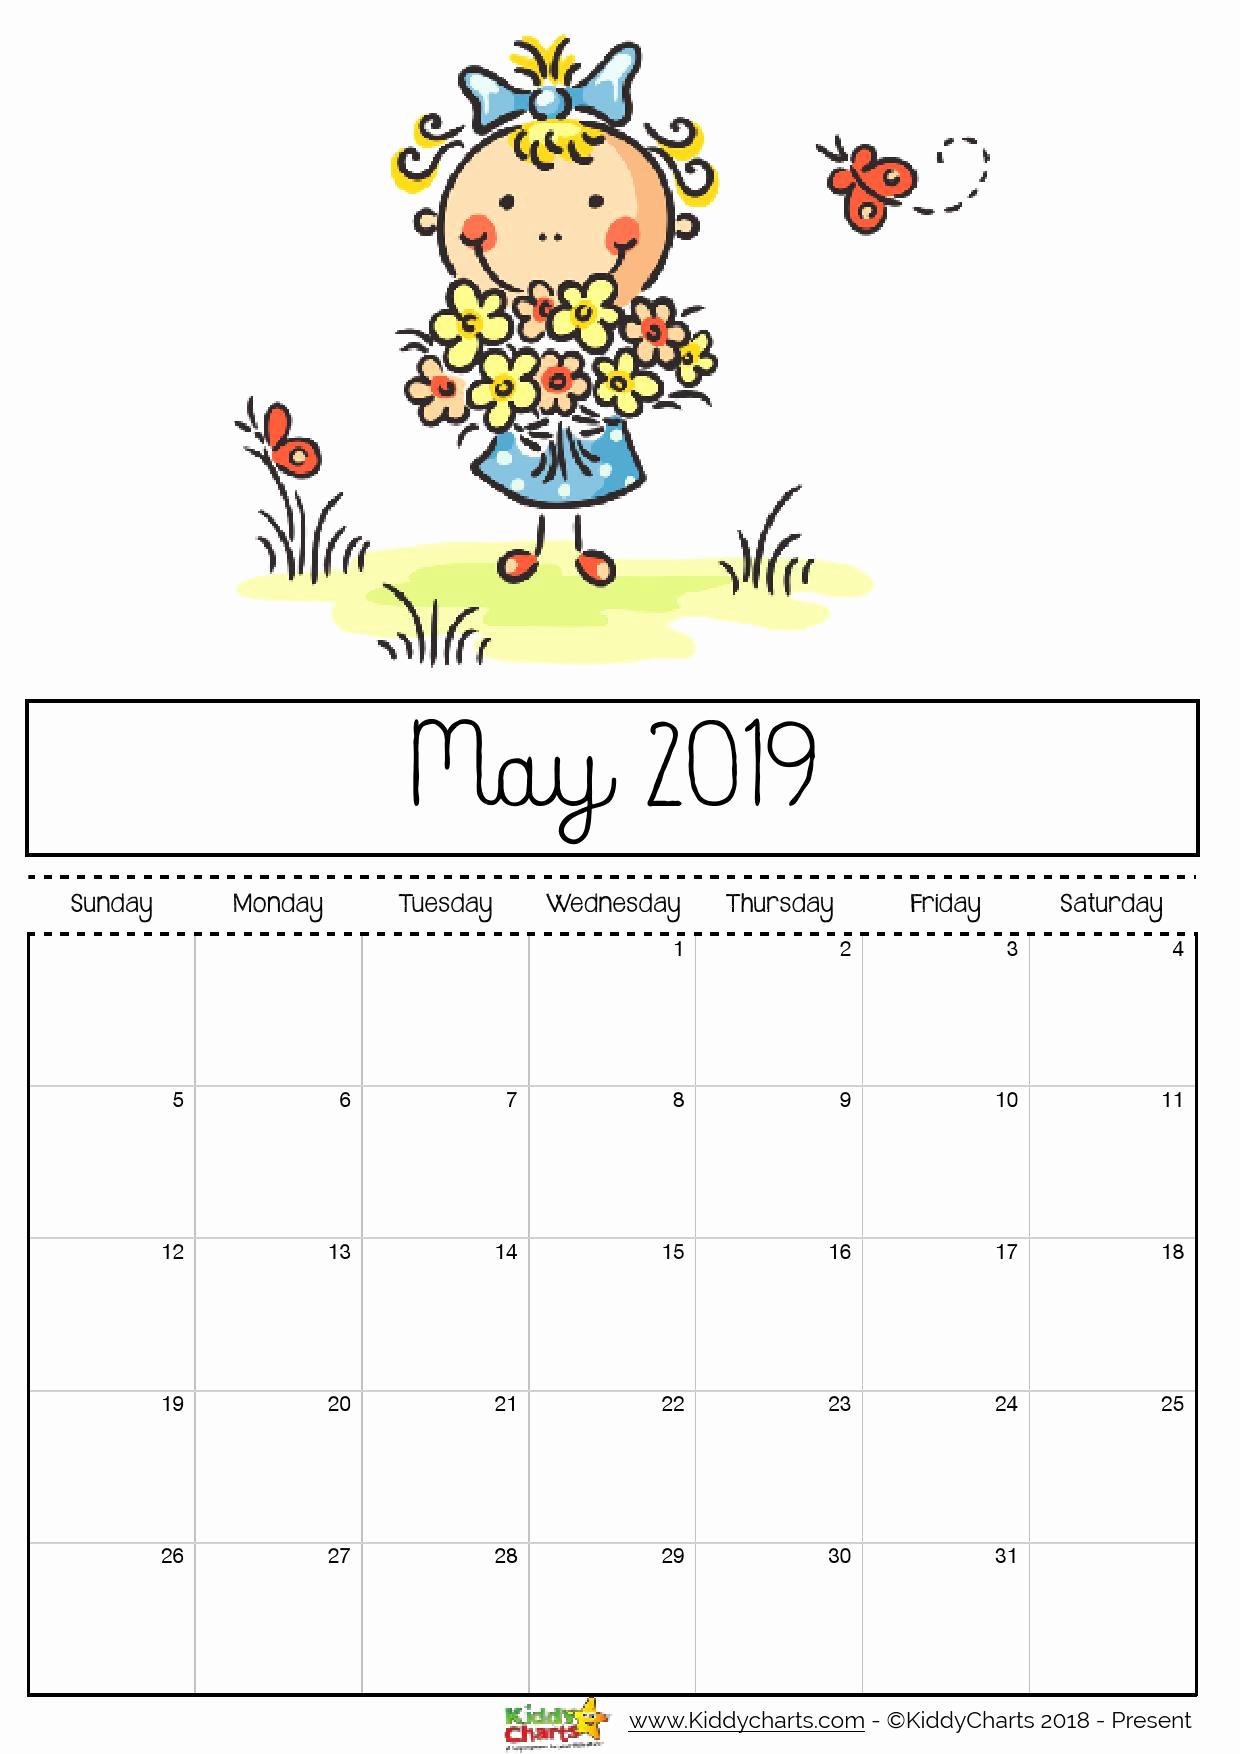 Floral Cute May 2019 Calendar Printable for Kids, Student